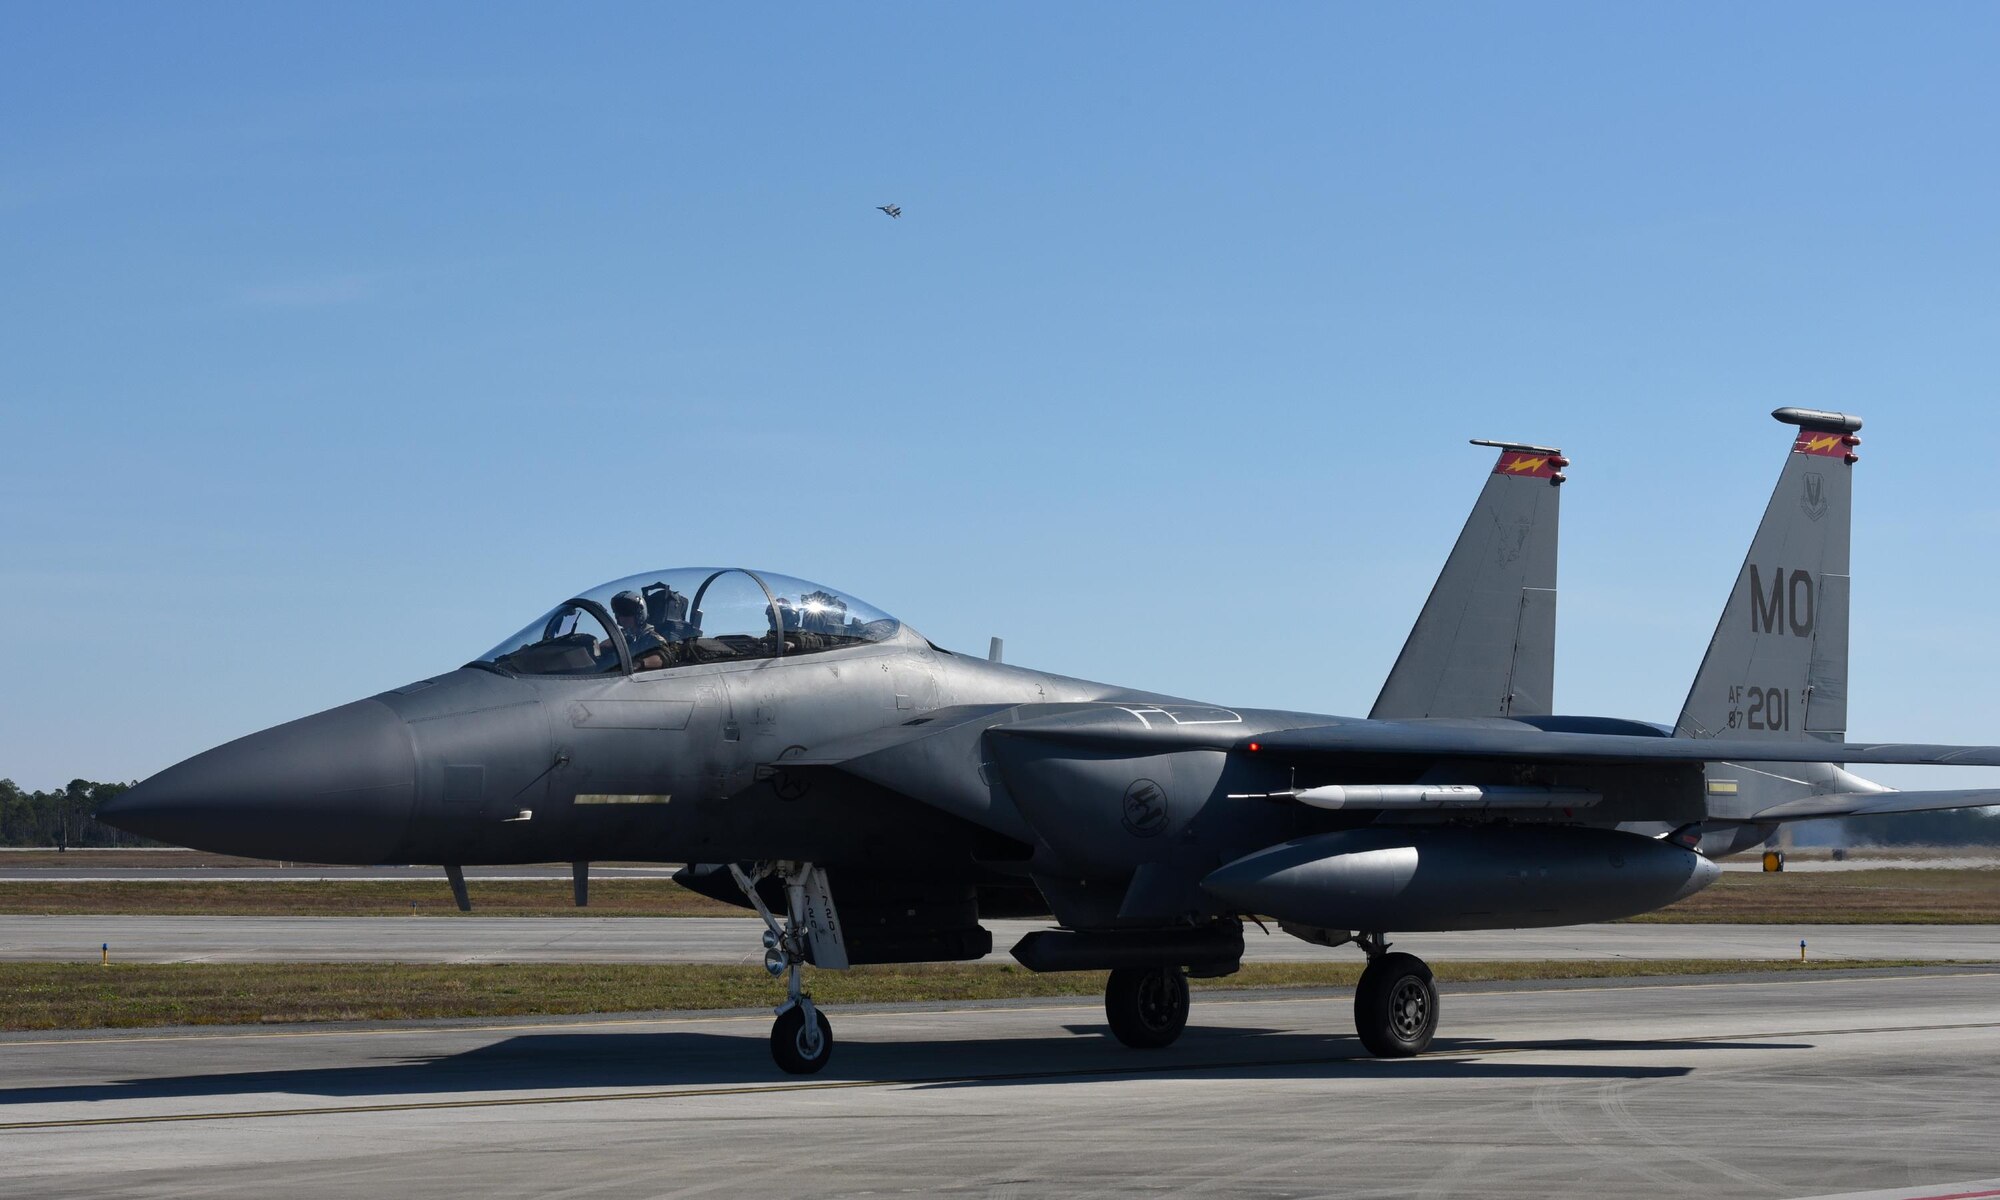 A U.S. Air Force F-15E Strike Eagle from Mountain Home Air Force Base, Idaho, taxies down the flightline during Checkered Flag 17-1 at Tyndall Air Force Base, Fla., Dec. 16, 2016. More than 300 Airmen from Mountain Home AFB deployed along with 16 F-15E Strike Eagles to participate in the large-force exercise, integrating with other fourth-generation aircraft as well as the F-22 Raptor and the F-35 Lightning II. (U.S. Air Force photo by Staff Sergeant Alex Fox Echols III/Released)